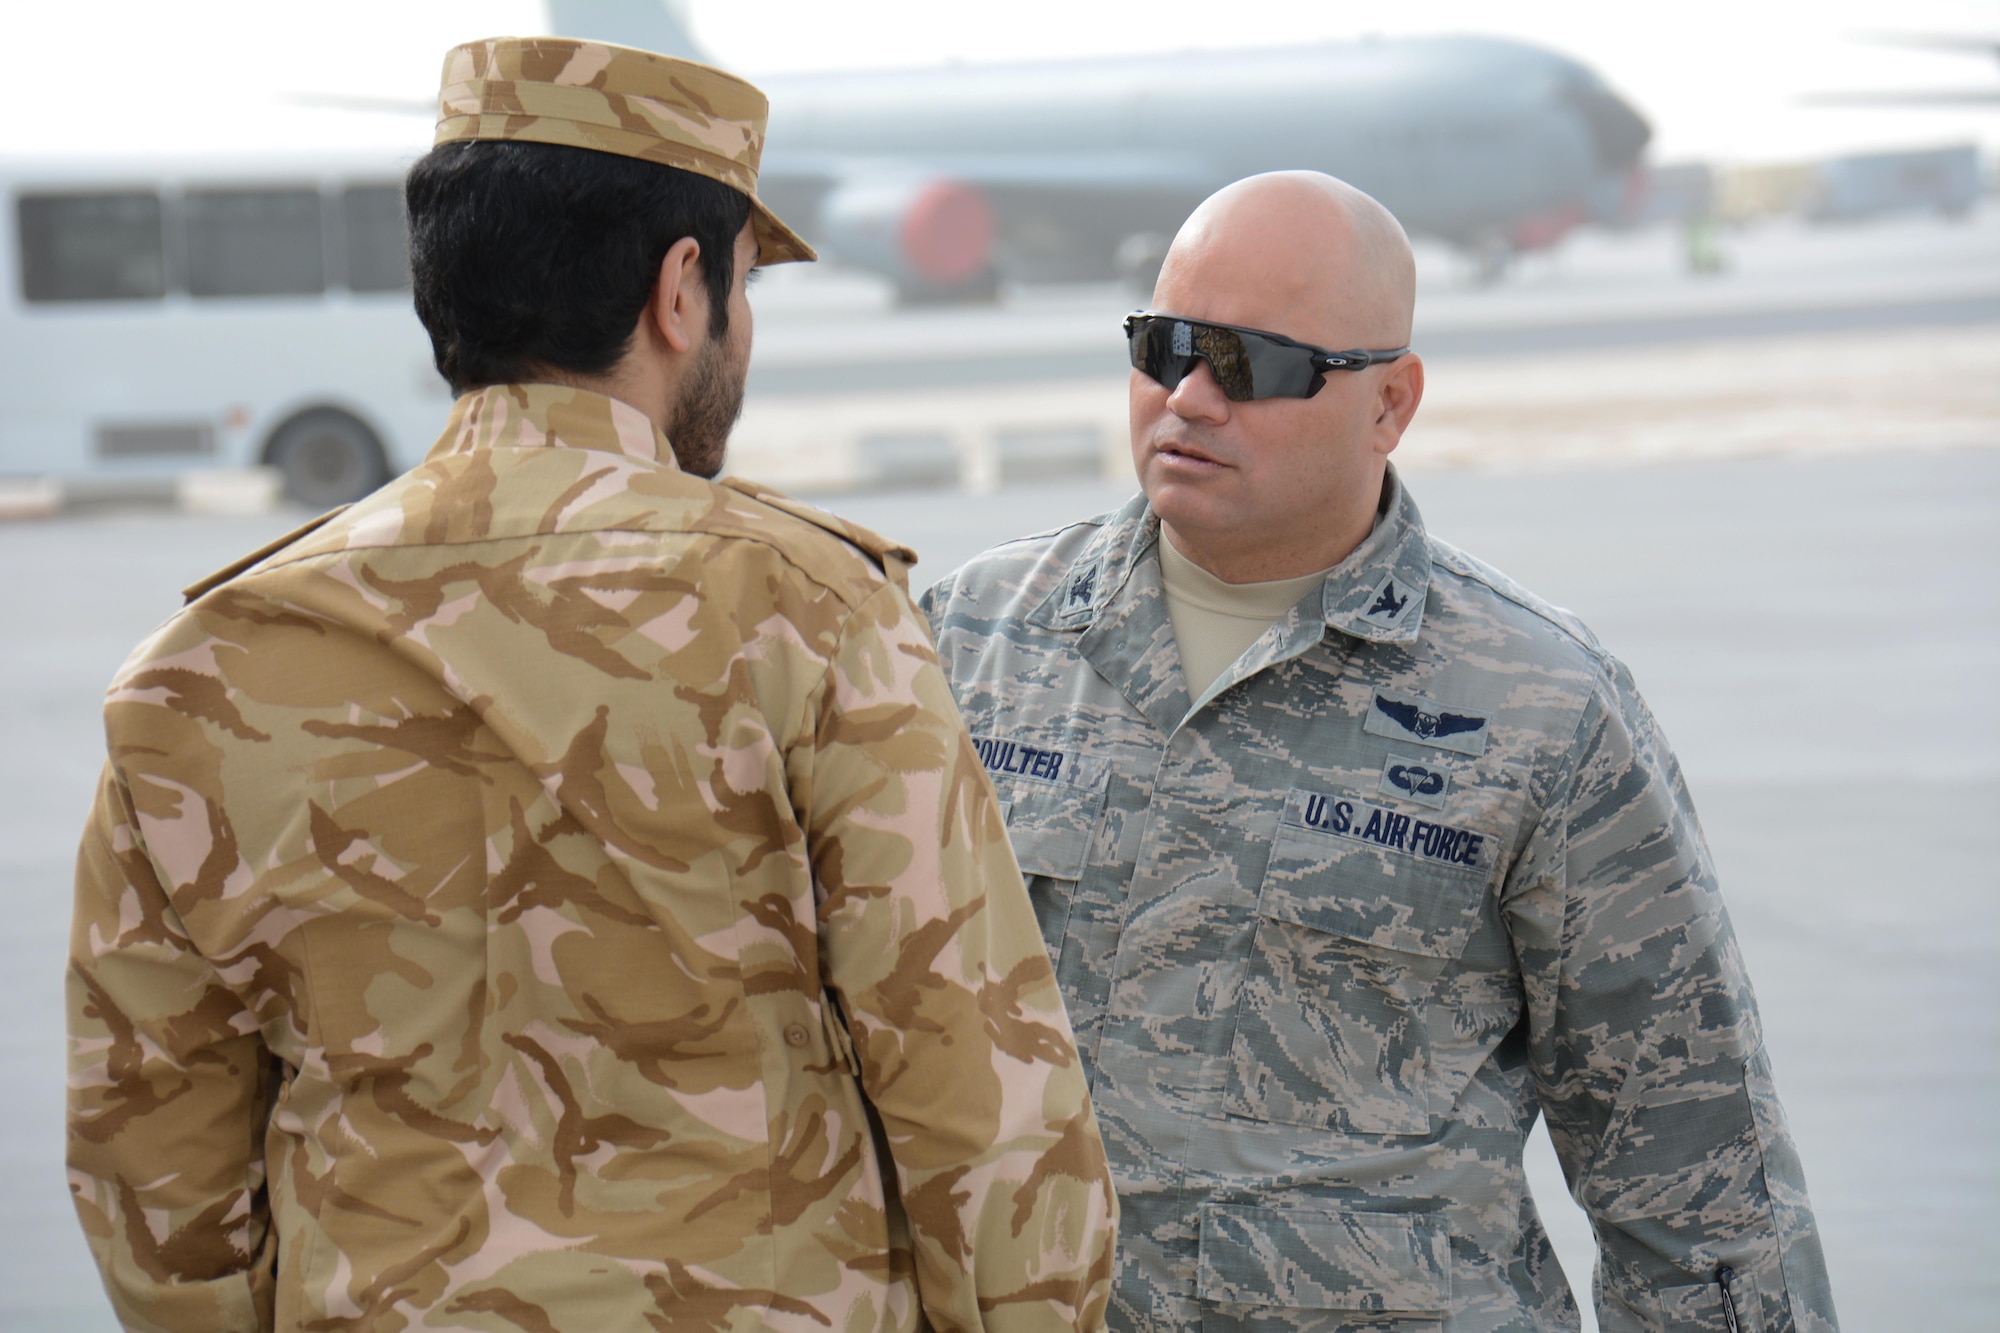 Col. Thomas Goulter, 379th Air Expeditionary Wing Host Nation Coordination Cell director, meets with a member of the Qatar Emiri Air Force at the annual Flight Line Fest Jan. 10 at Al Udeid Air Base, Qatar. The event featured nine aircraft and an emergency vehicle display. Flight Line Fest is a joint partnership between the 379 AEW and QEAF to foster relations between Qatar and the United States. (U.S. Air Force photo by Tech. Sgt. James Hodgman/Released)